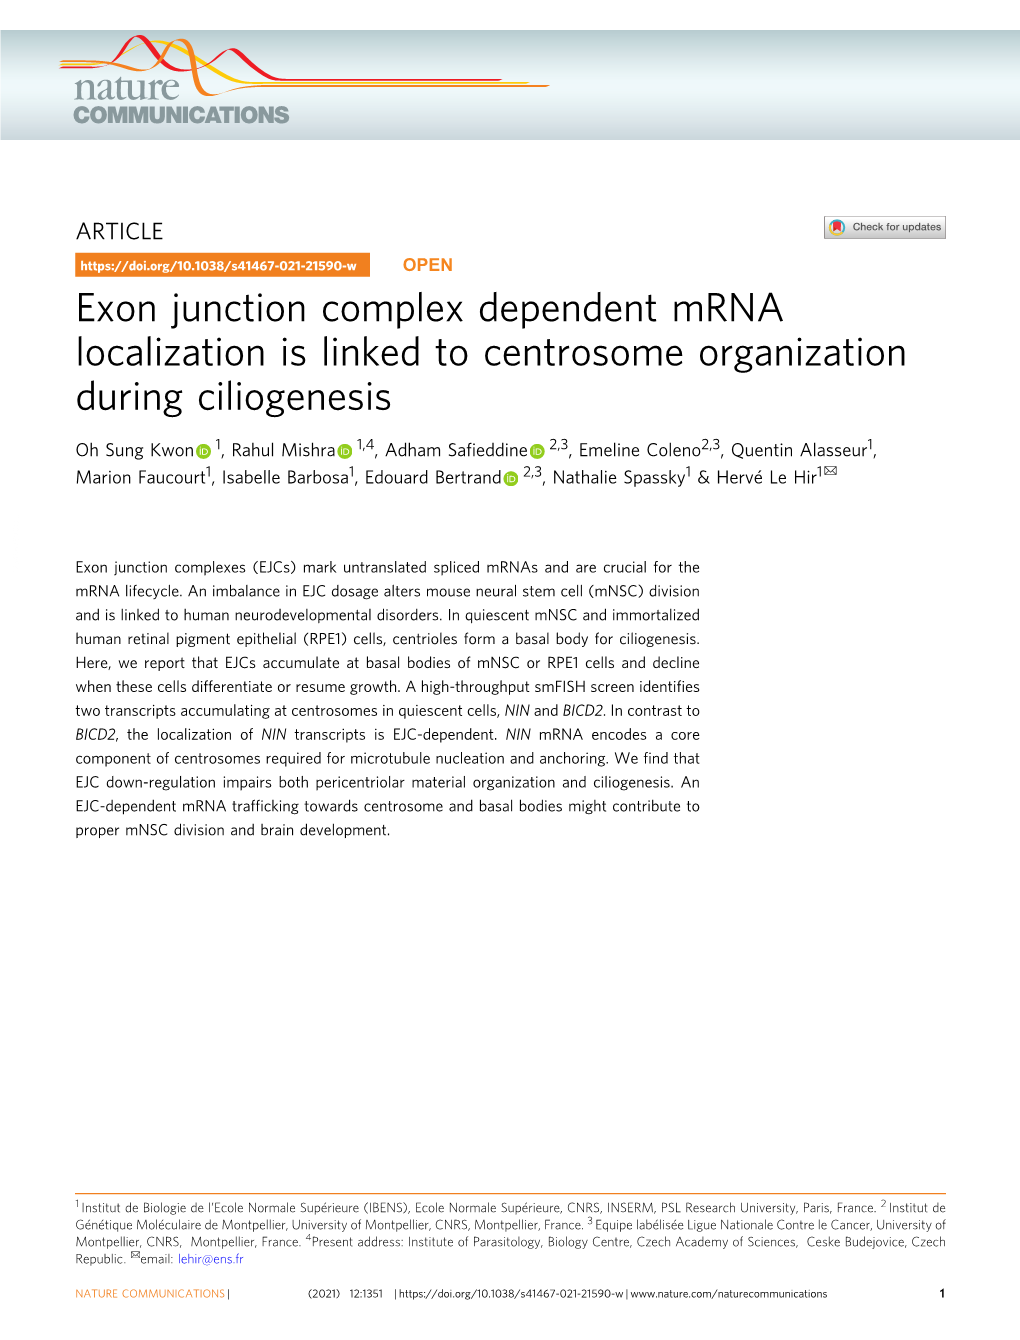 Exon Junction Complex Dependent Mrna Localization Is Linked to Centrosome Organization During Ciliogenesis